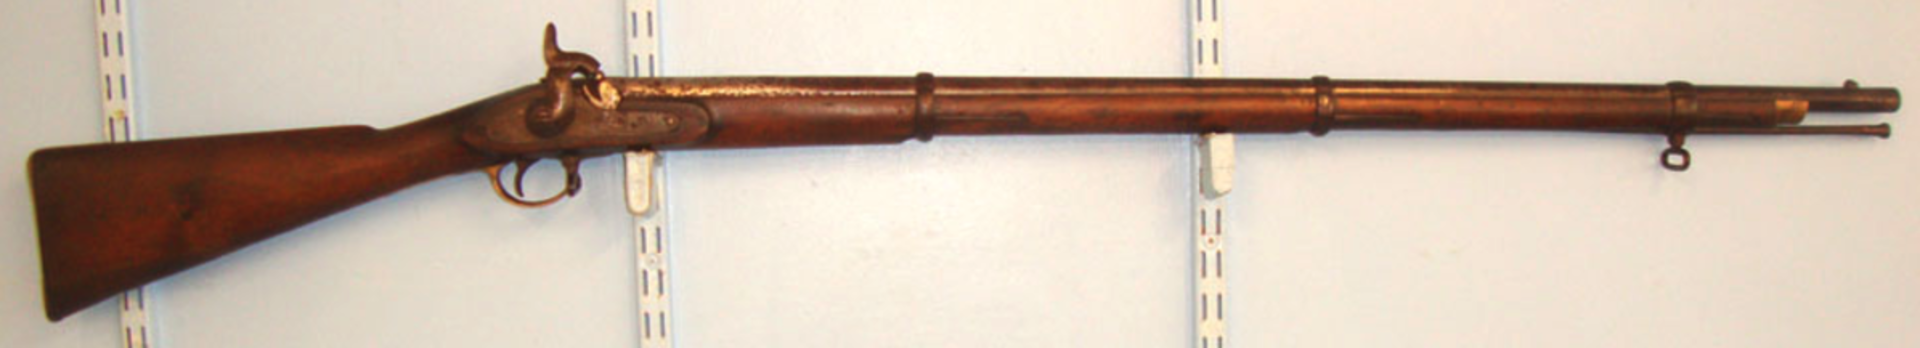 British Crimean War 1855 Dated Enfield Tower 3 Band .577 Percussion Rifle Regiment ‘V Drb2 50’.